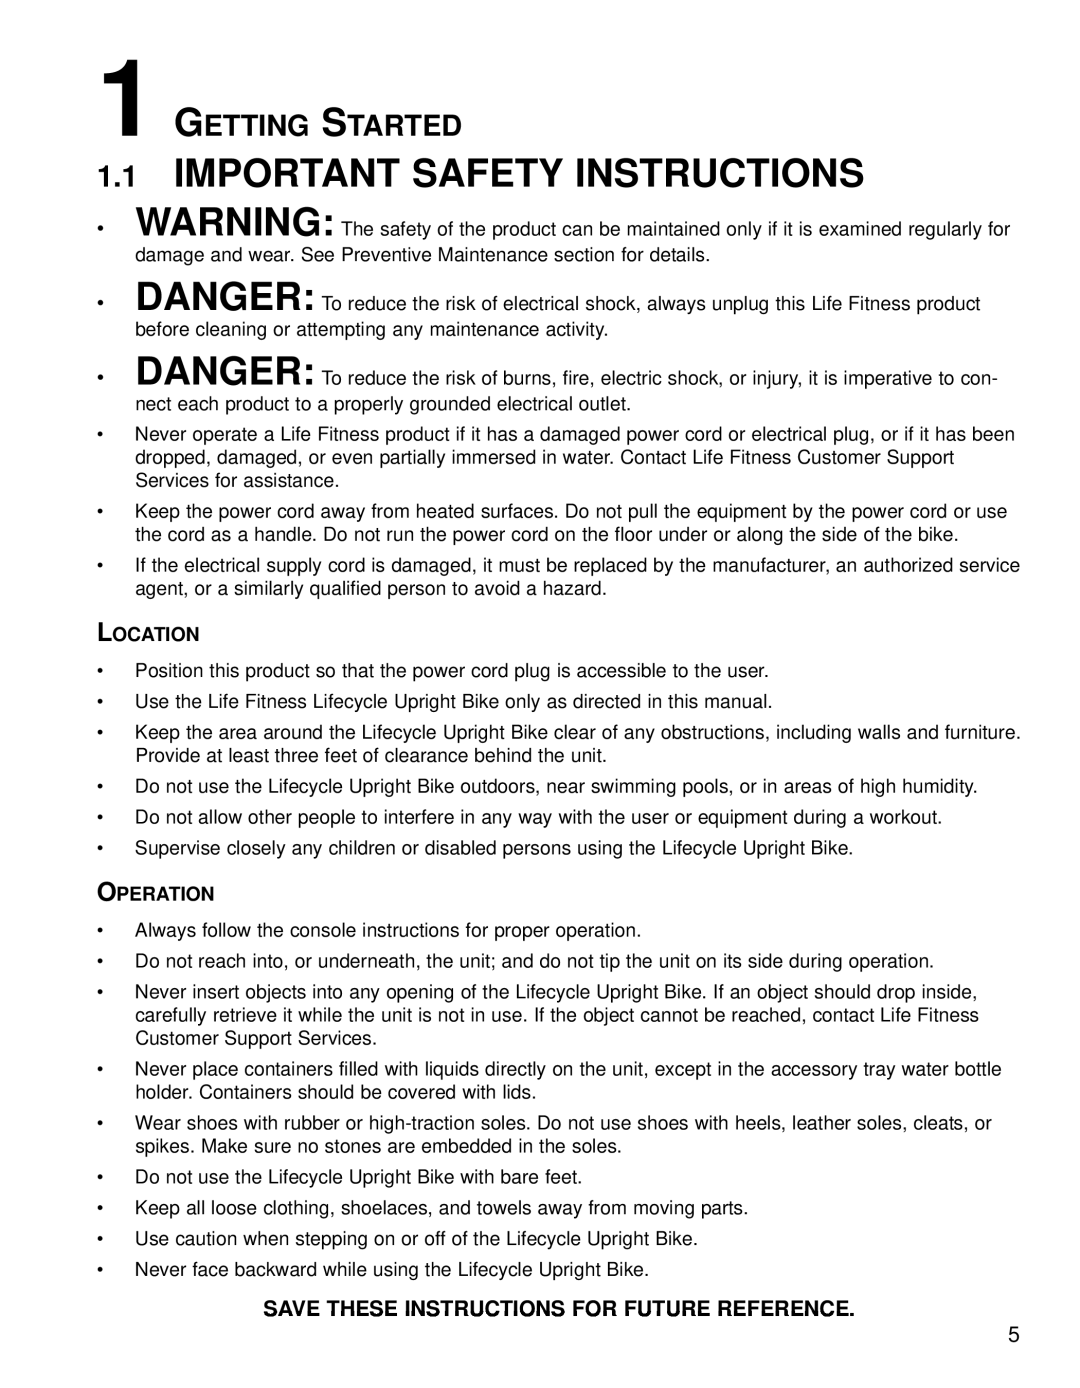 Life Fitness 95CE operation manual Important Safety Instructions, Getting Started, Location, Operation 